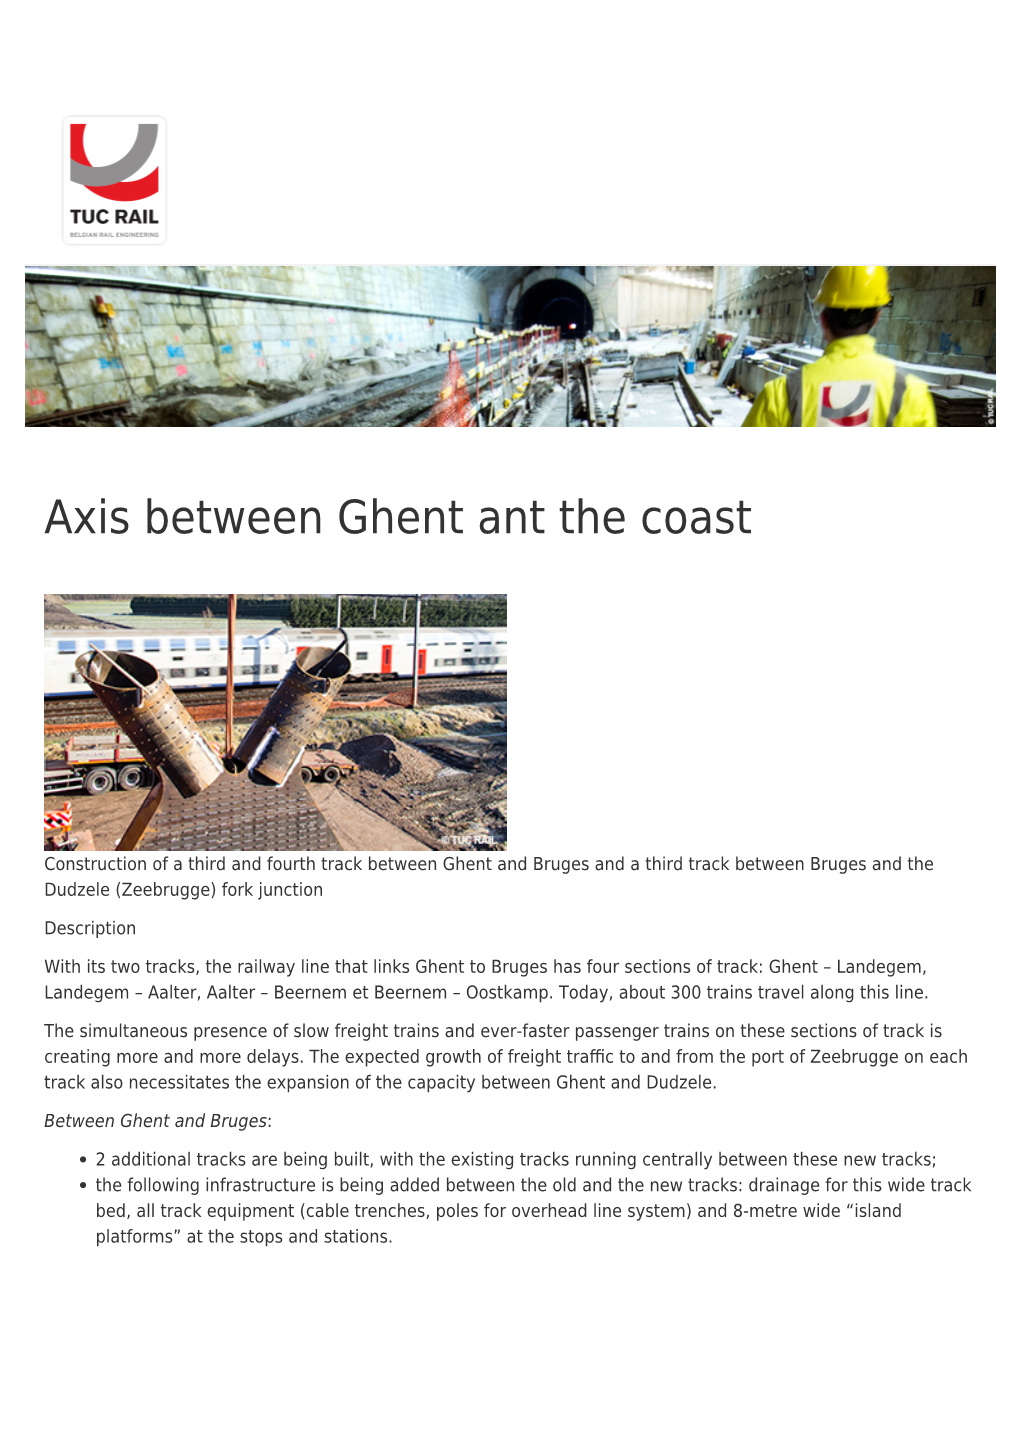 Axis Between Ghent Ant the Coast | TUC RAIL